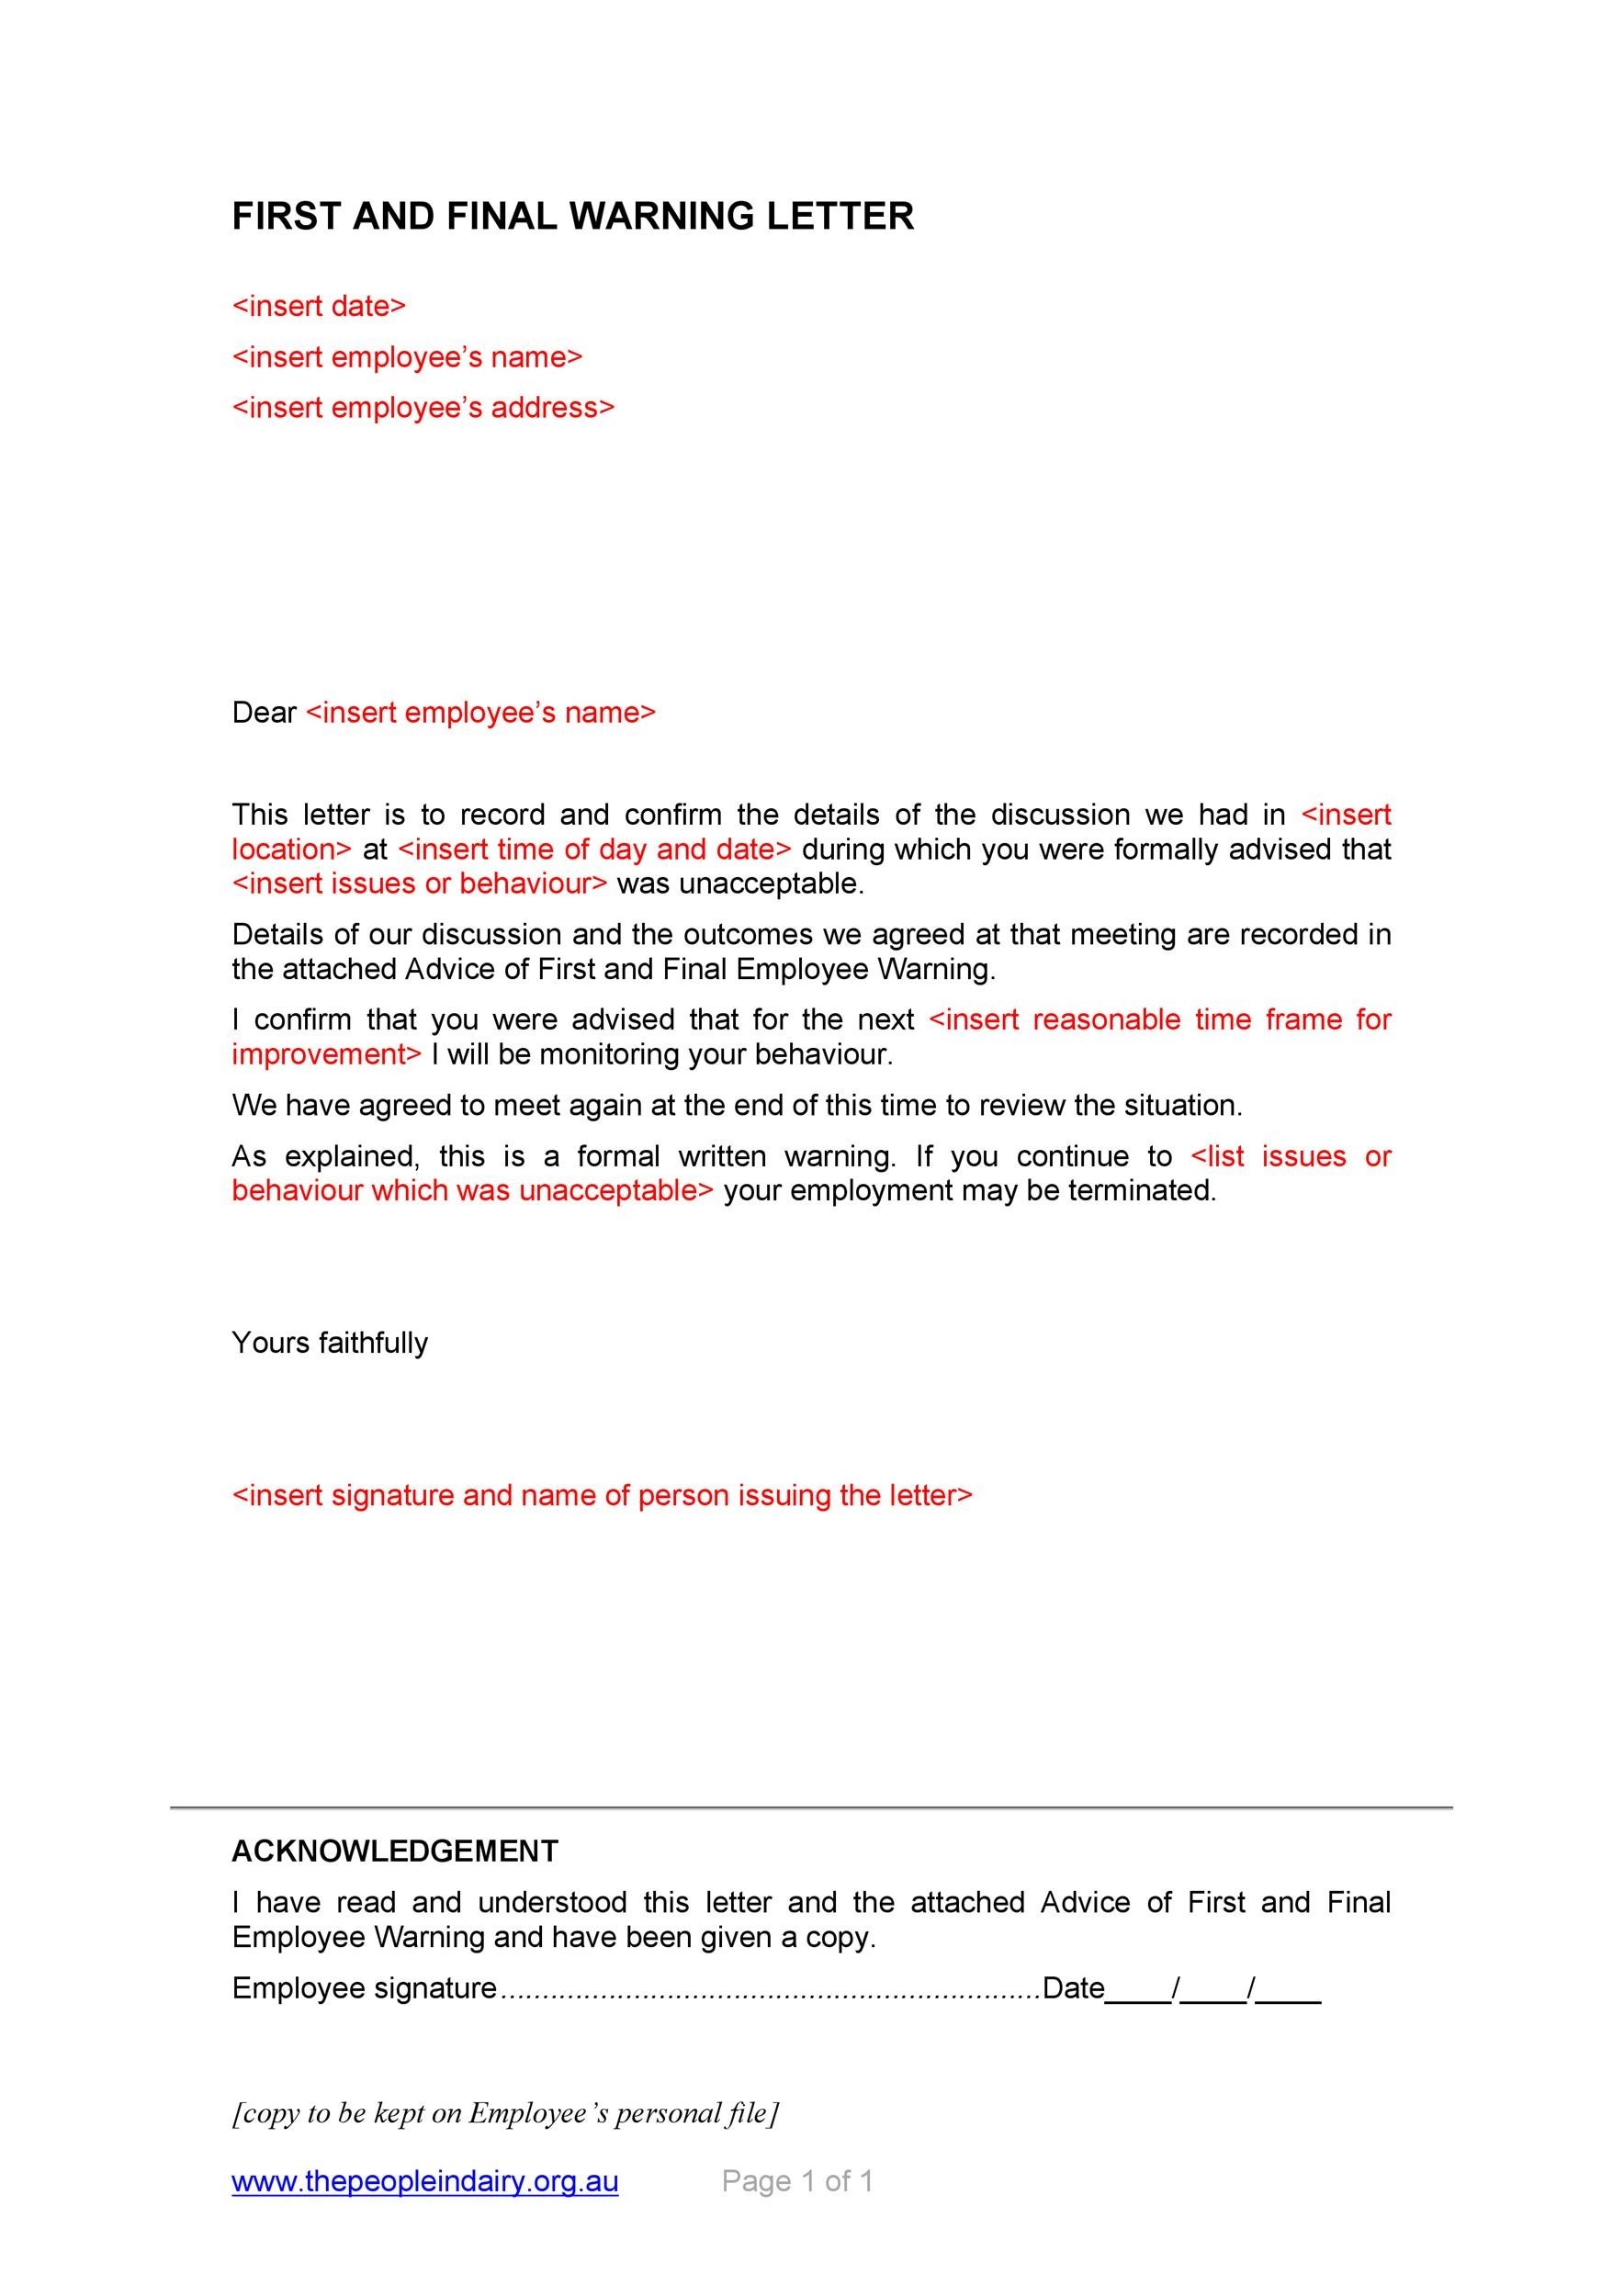 employee-warning-letter-template-tutore-org-master-of-documents